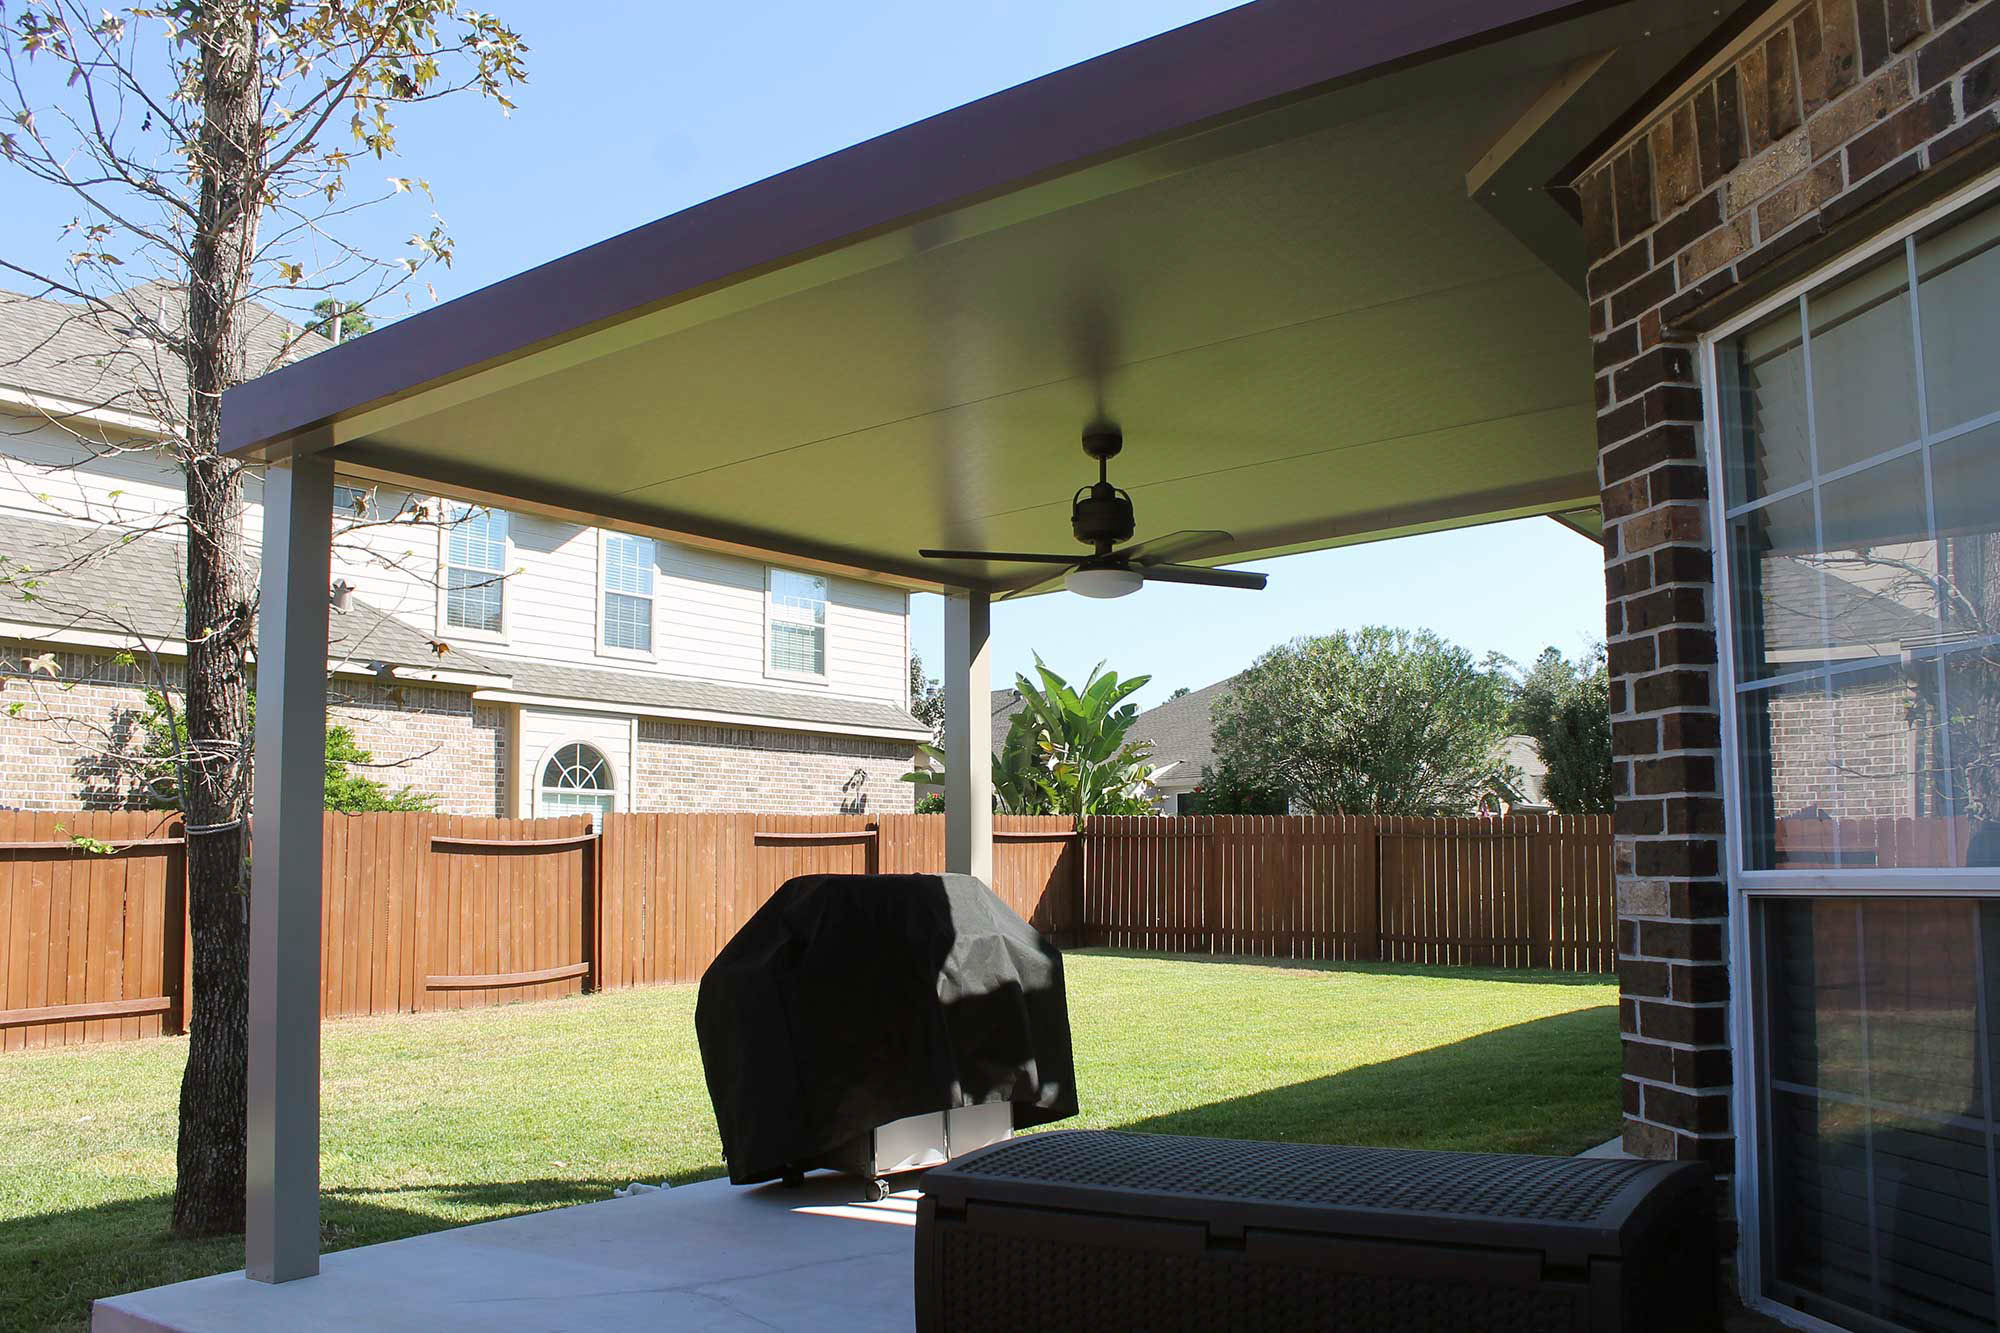 Insulated Patio Cover